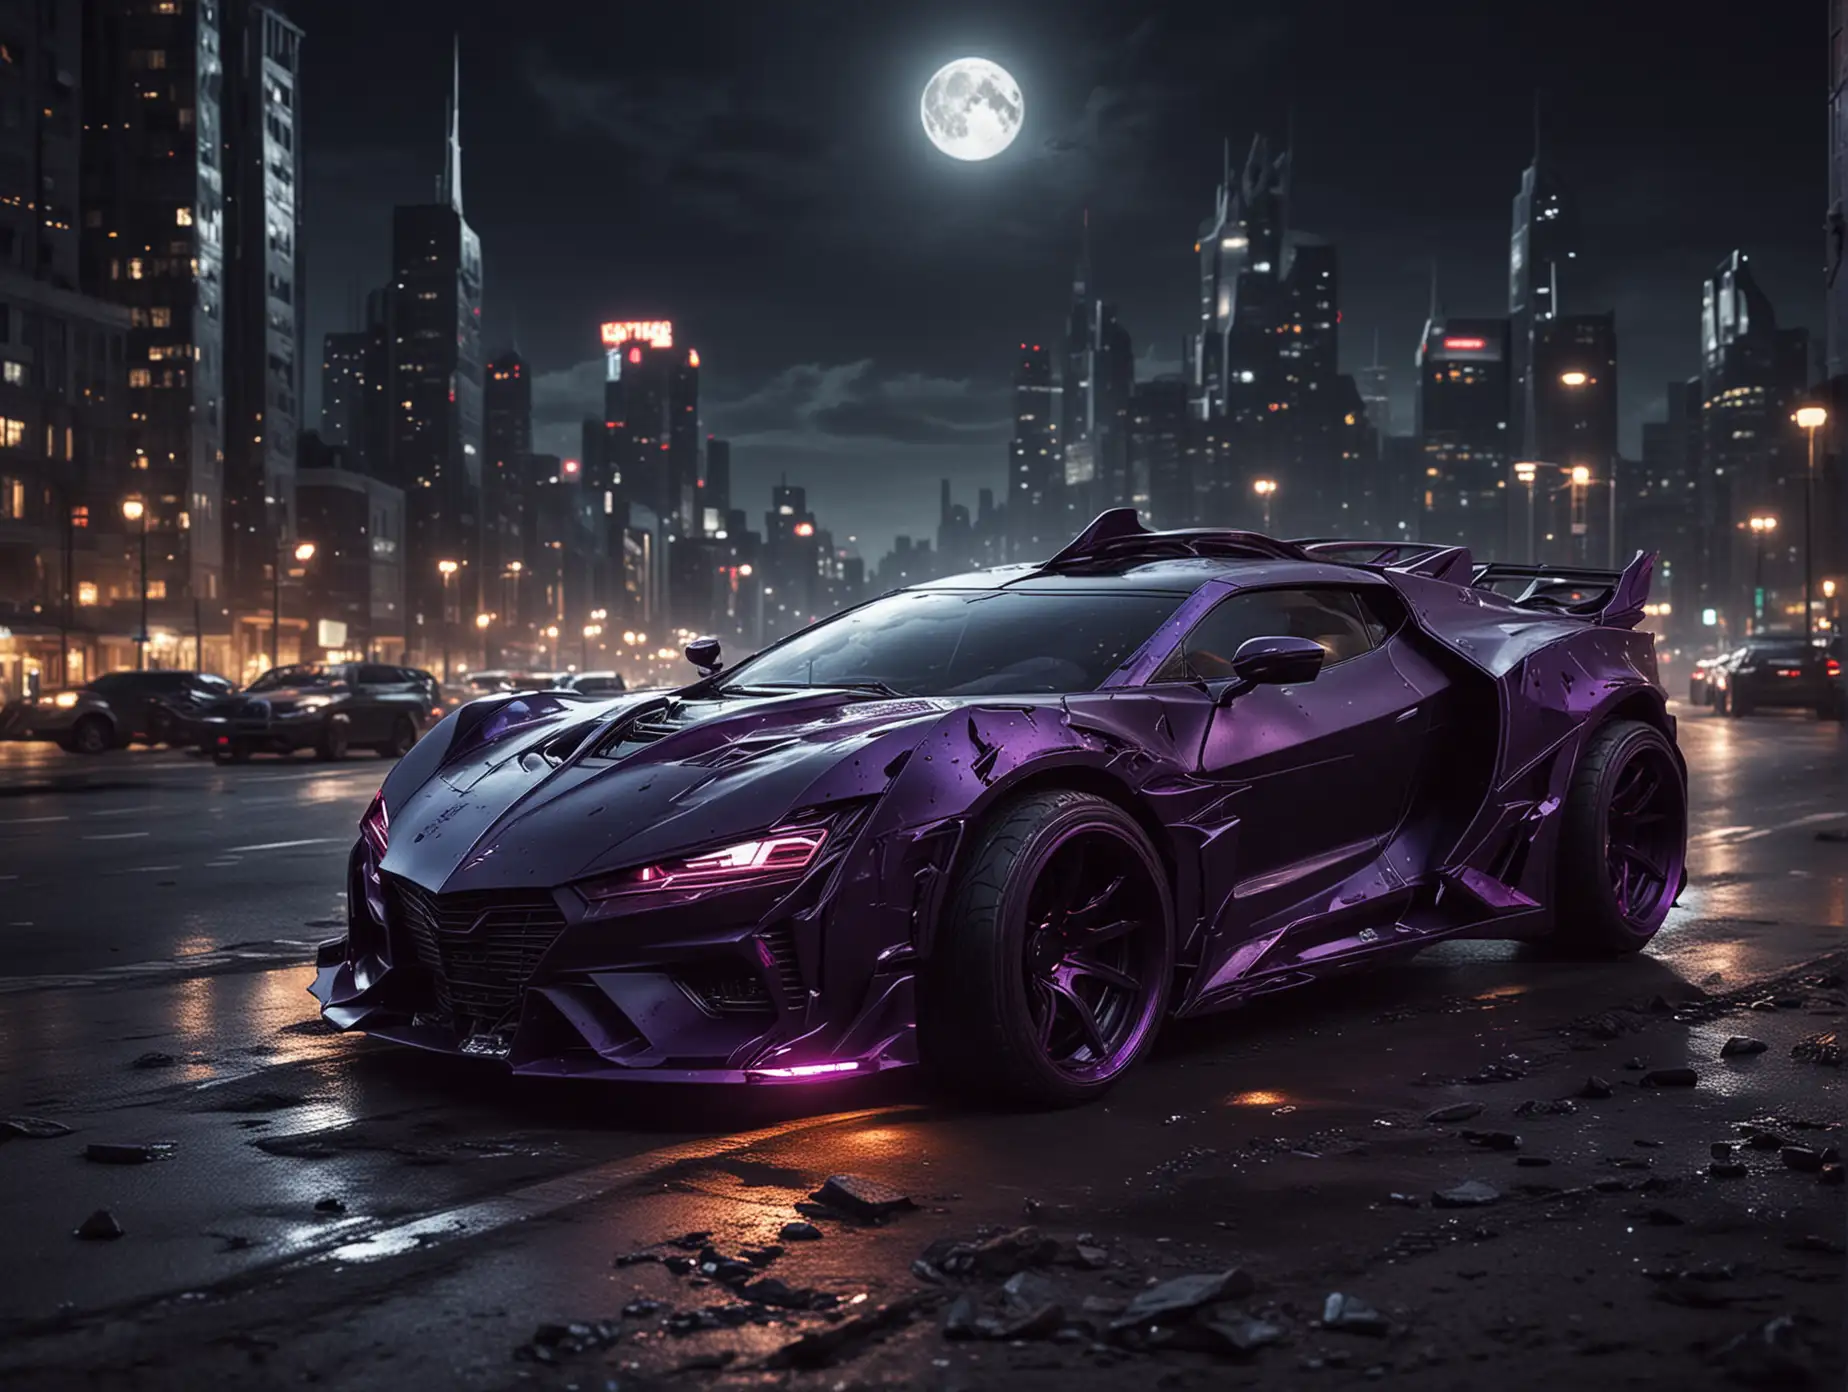 Create  futuristic sports cars from  lion, tiger, batman & spiderman evil tuning type Downhill in city on moon view from moon to see Earth  rear view from high far away,  car color dark black,  dark violet car lights